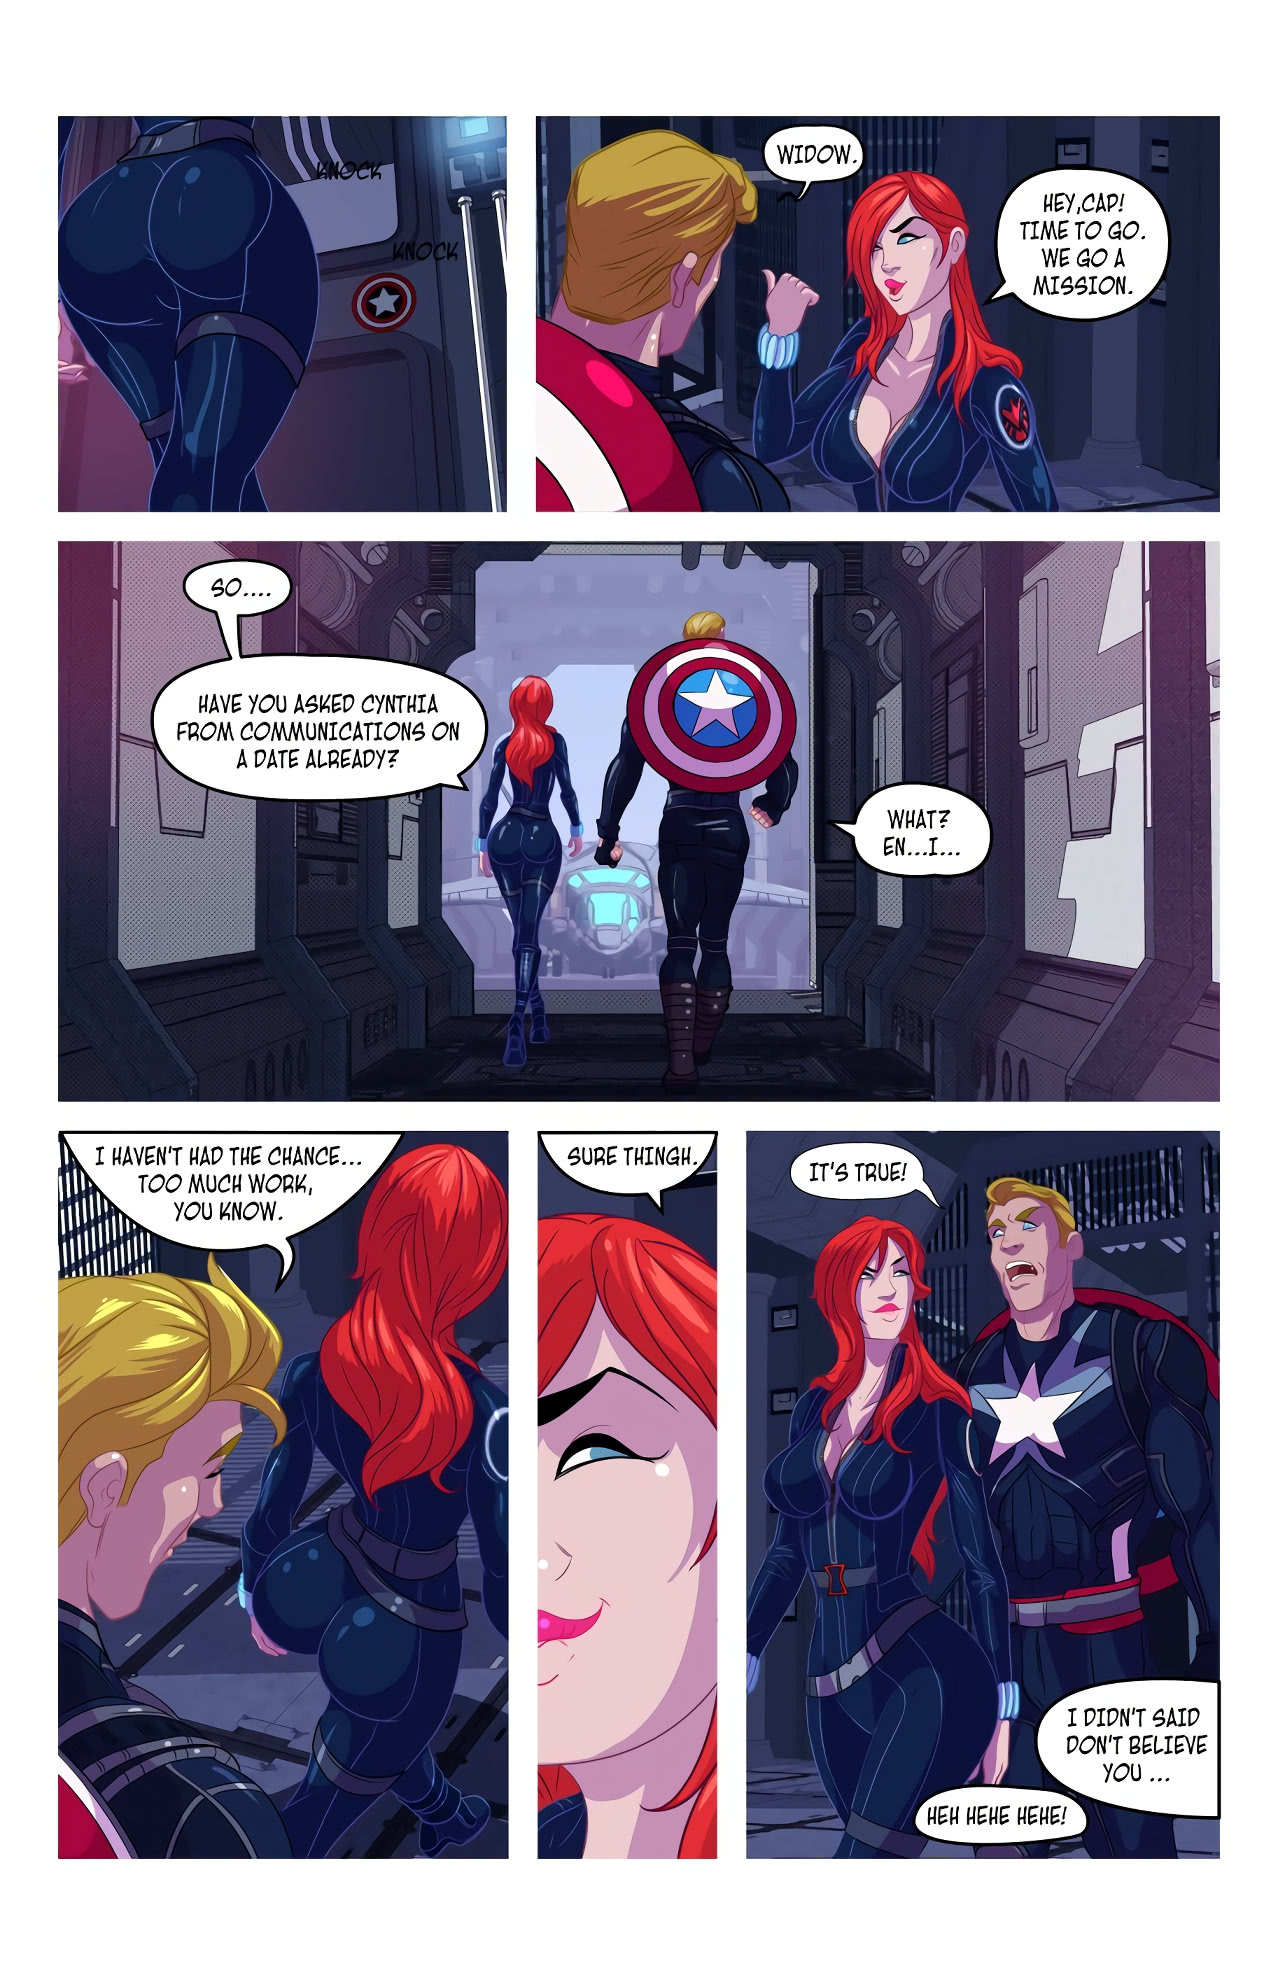 Widow's Downtime - Page 4